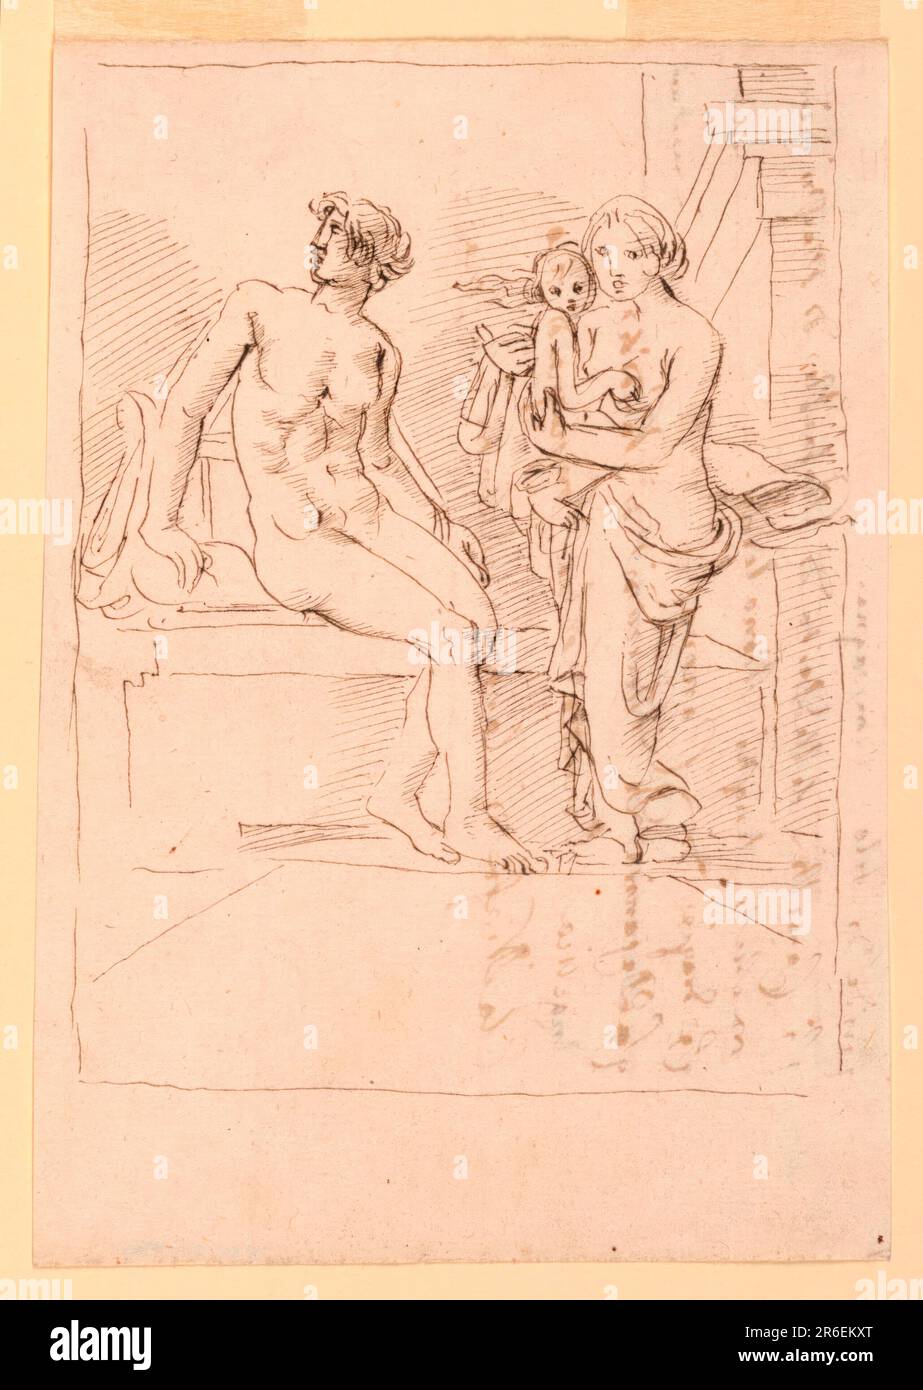 Sketch, Classical Man, Woman, and Child. pen and ink on paper. Date: 1820-1850. Museum: Cooper Hewitt, Smithsonian Design Museum. Stock Photo